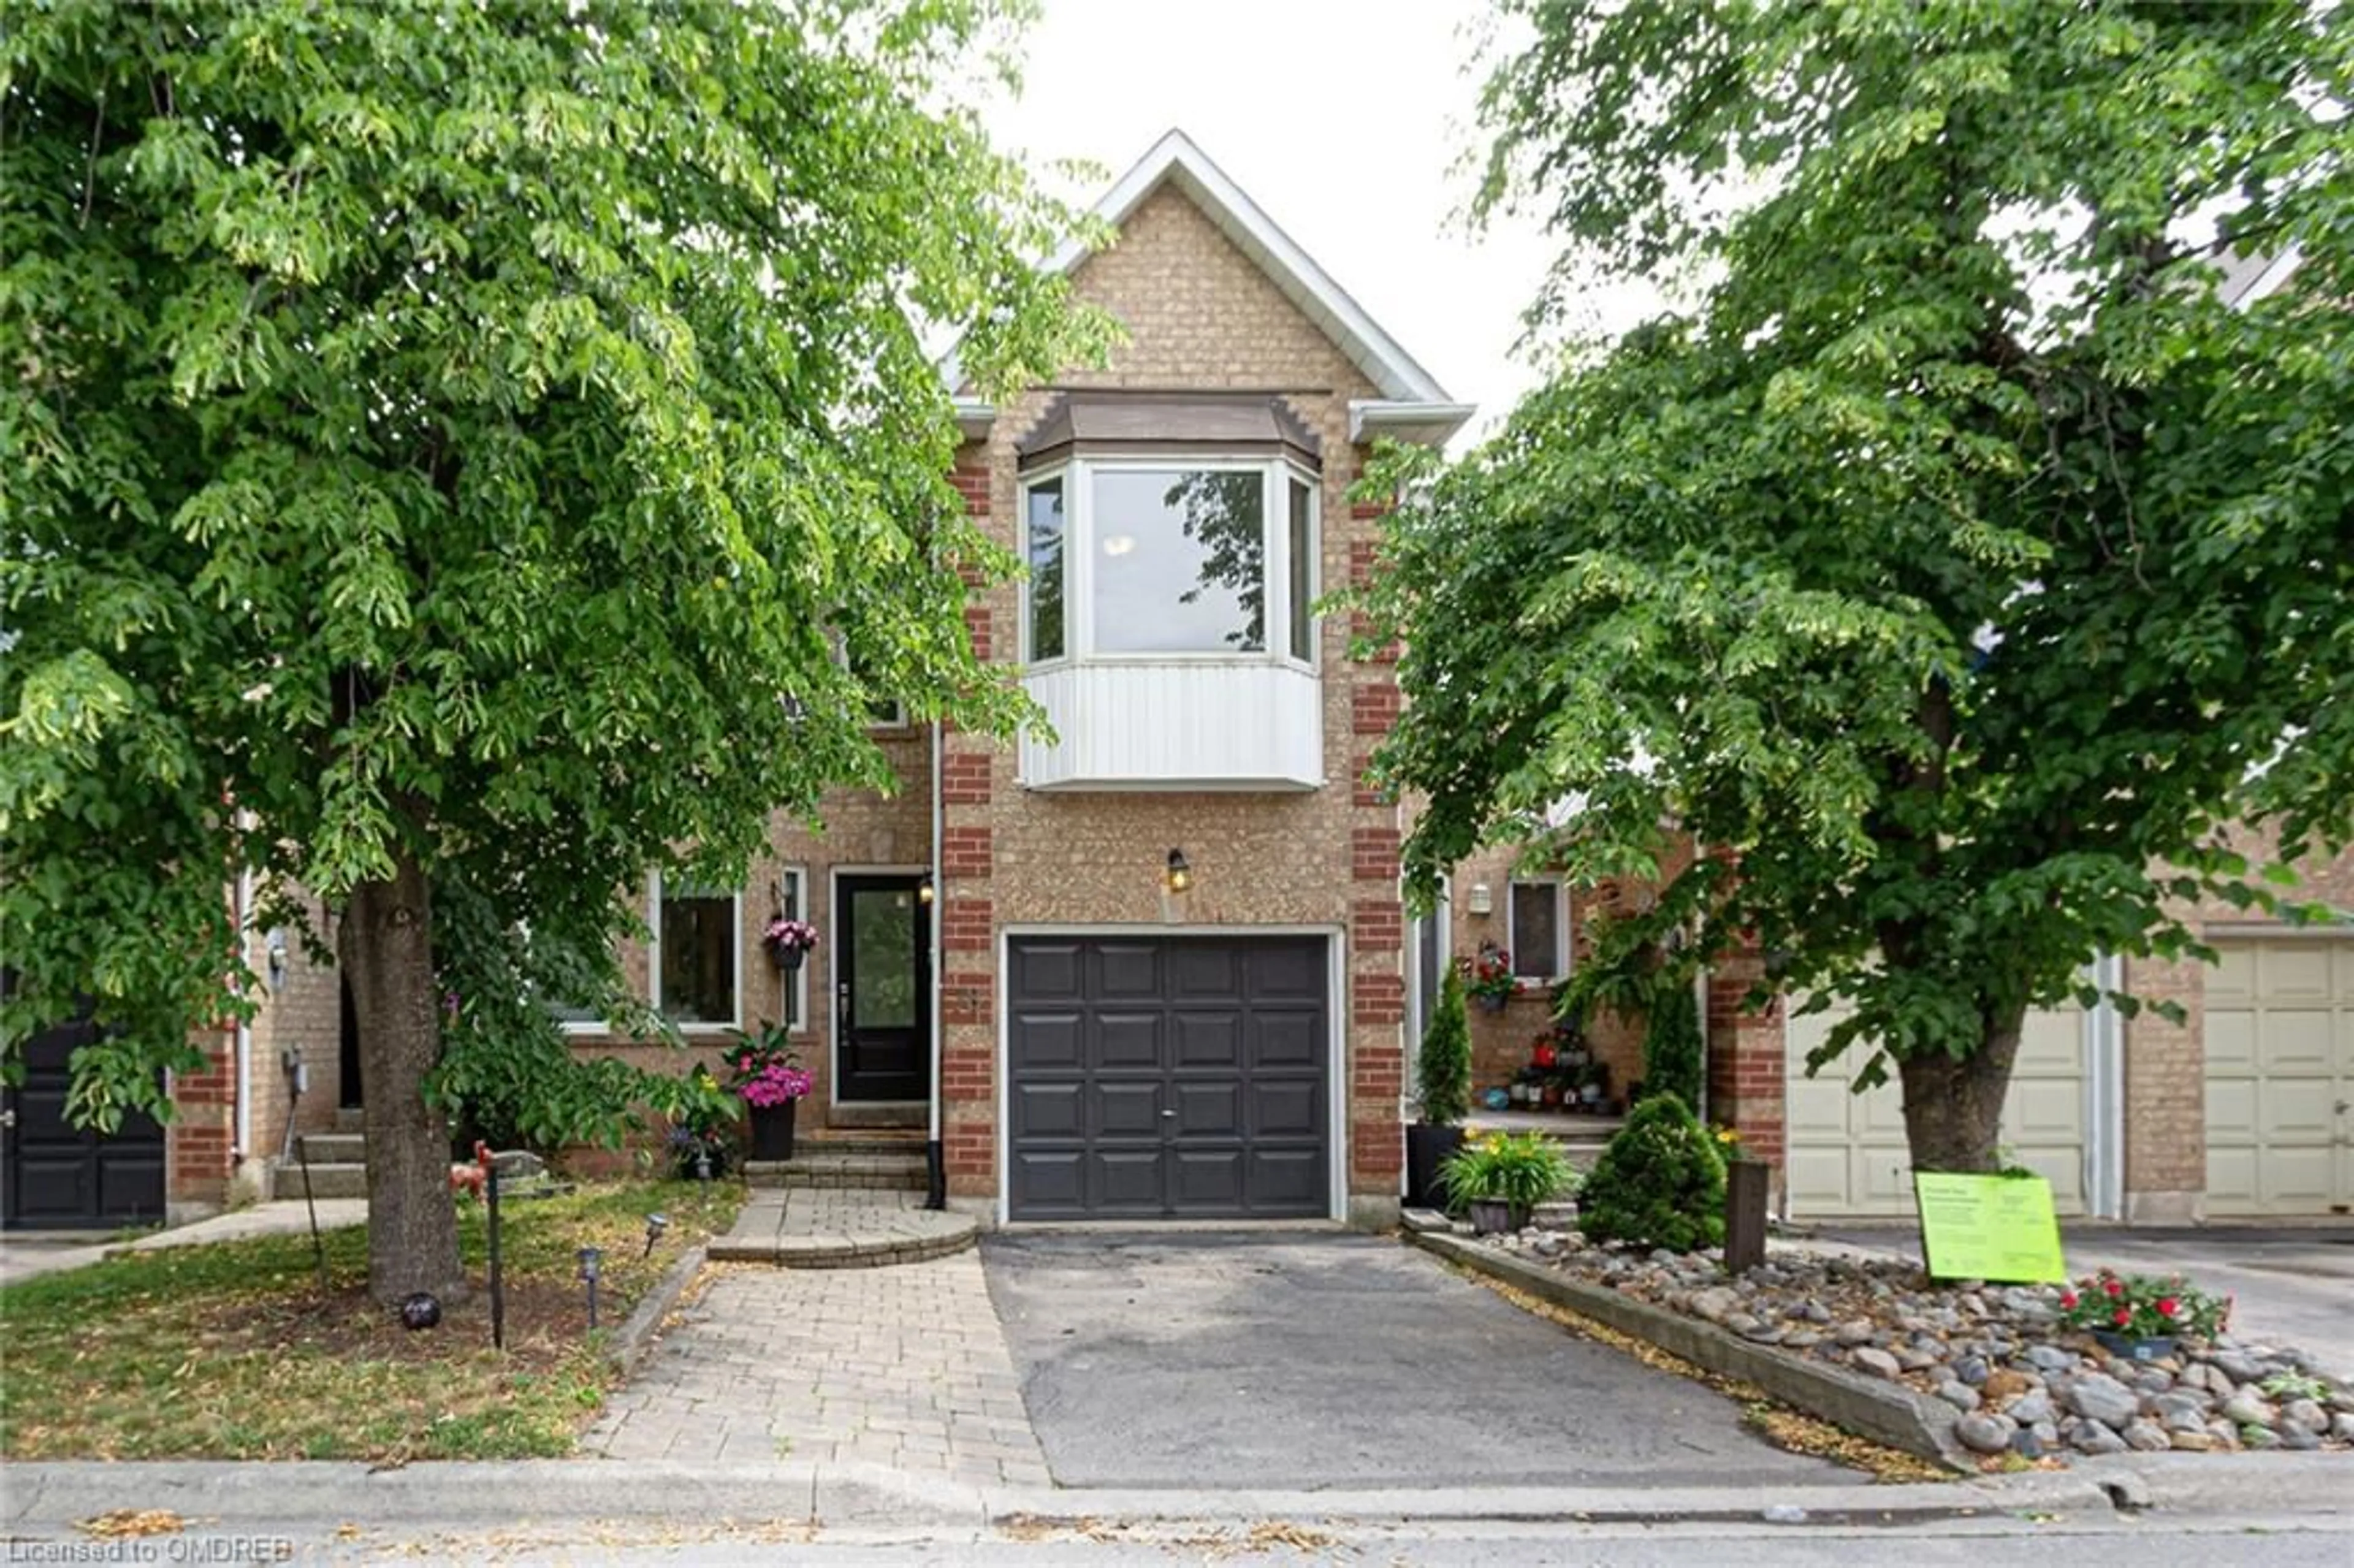 Home with brick exterior material for 1240 Westview Terr #78, Oakville Ontario L6M 3M4